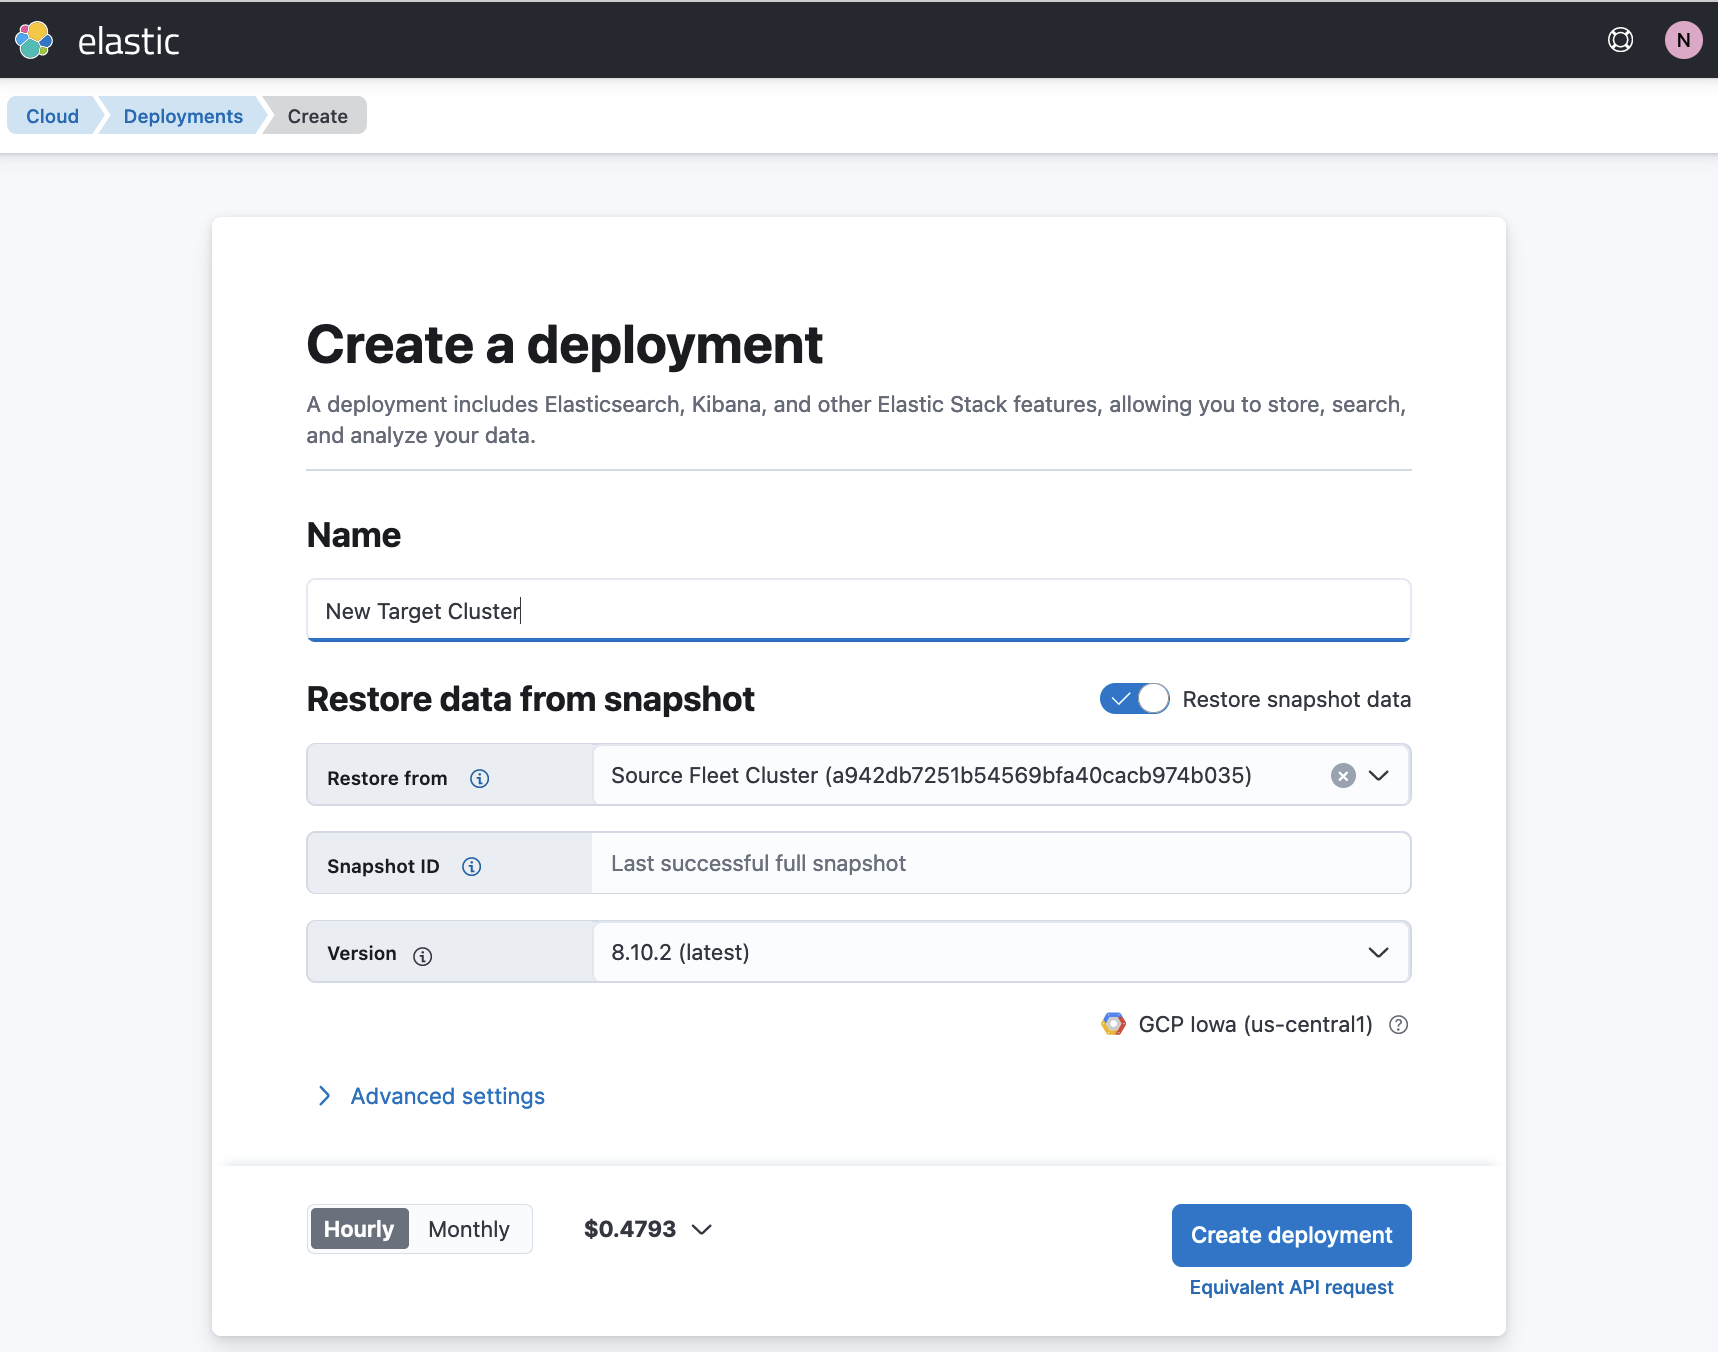 Create a deployment page